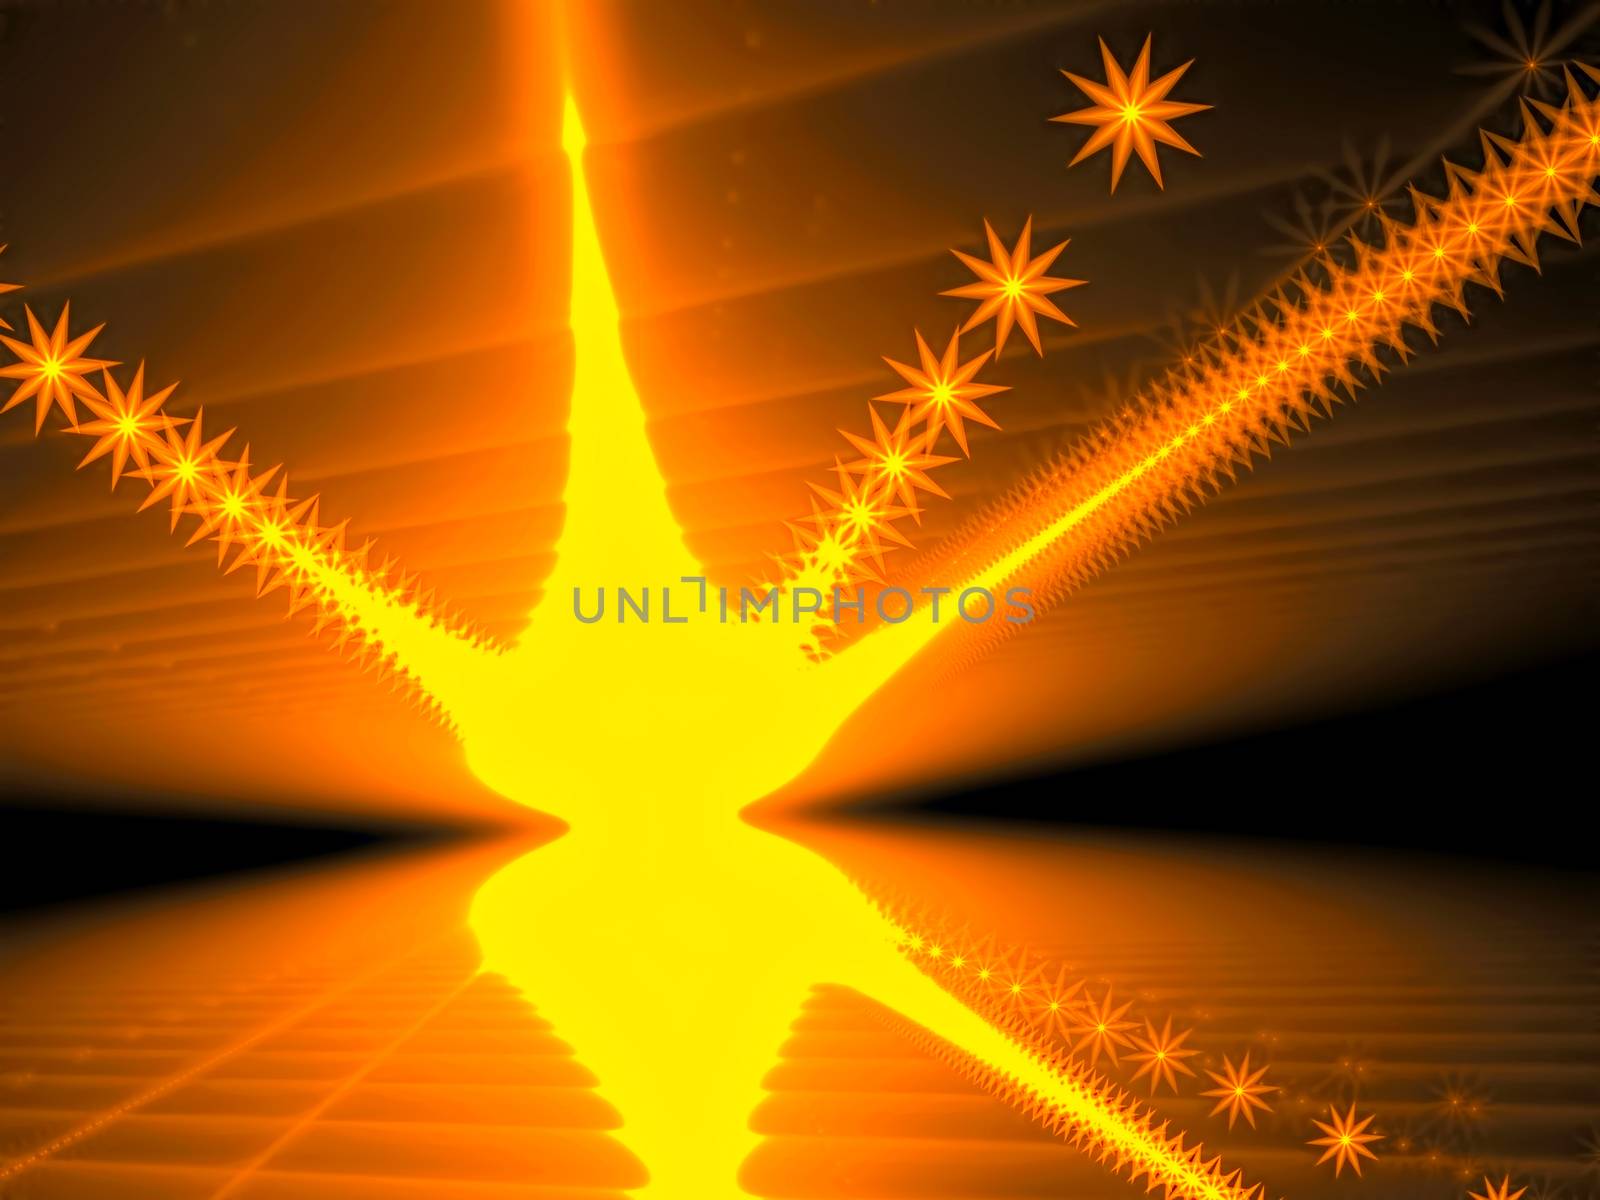 Simple fractal background: bright burst with rays consist of stars. Abstract computer-generated image. Technology or sci-fi backdop for banners, web design, covers